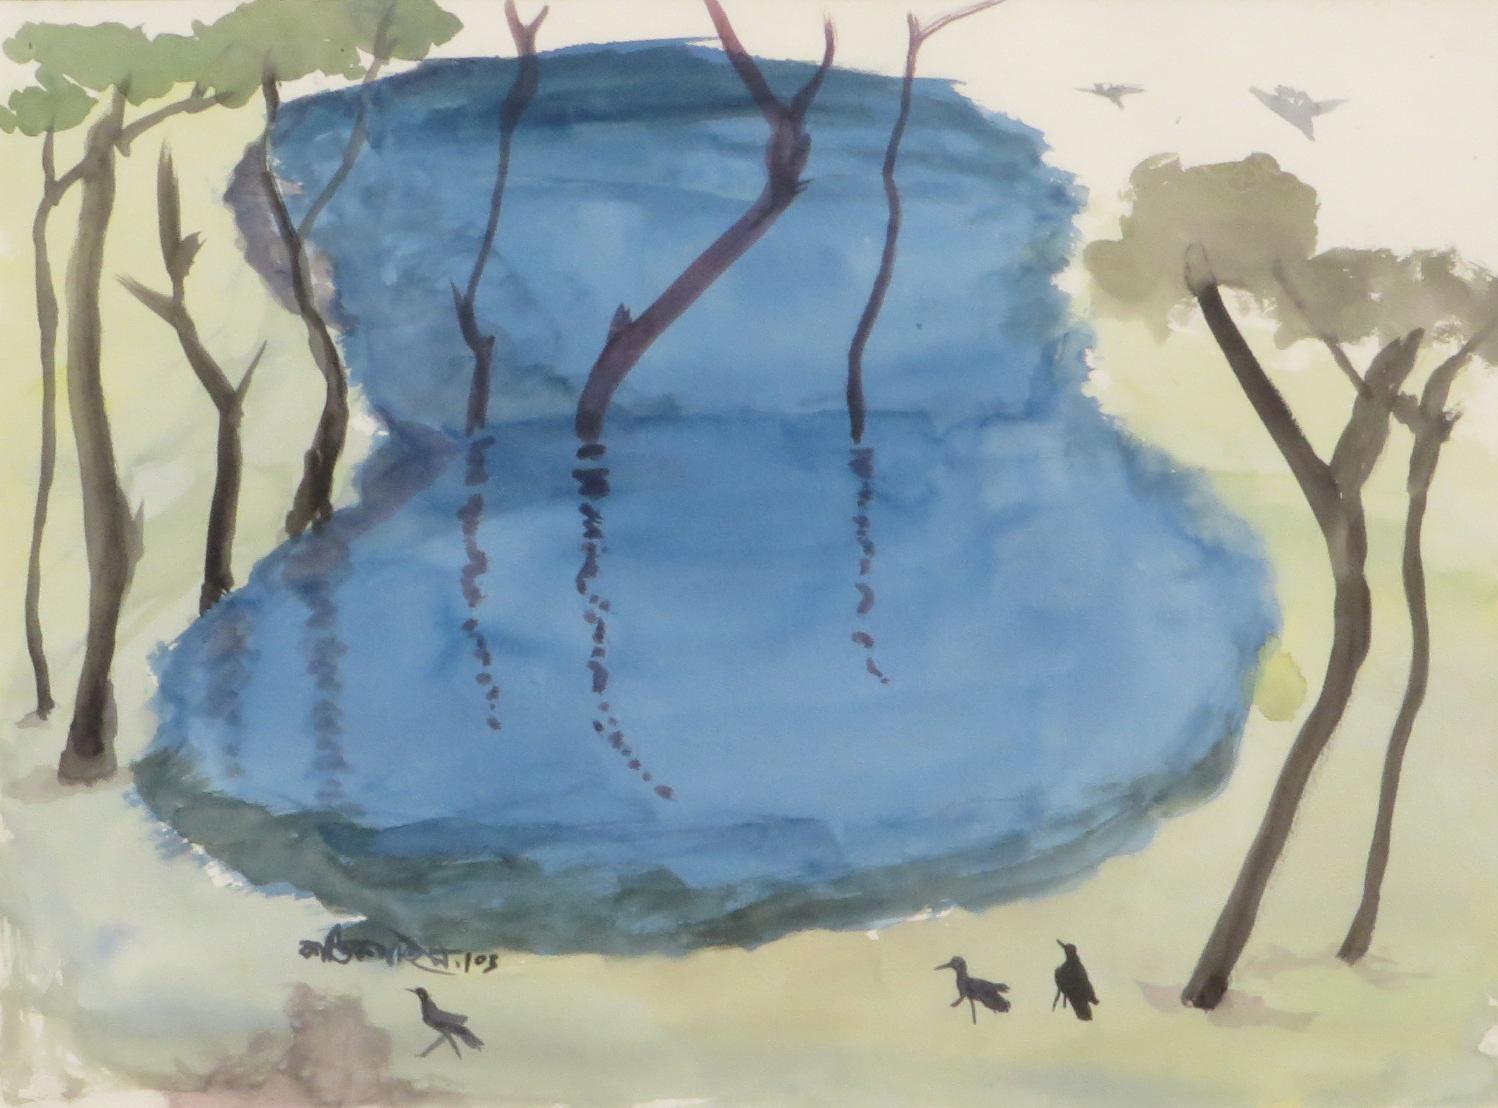 Landscape, Trees, Pond, Watercolor on paper, Blue, Green, Brown Colors